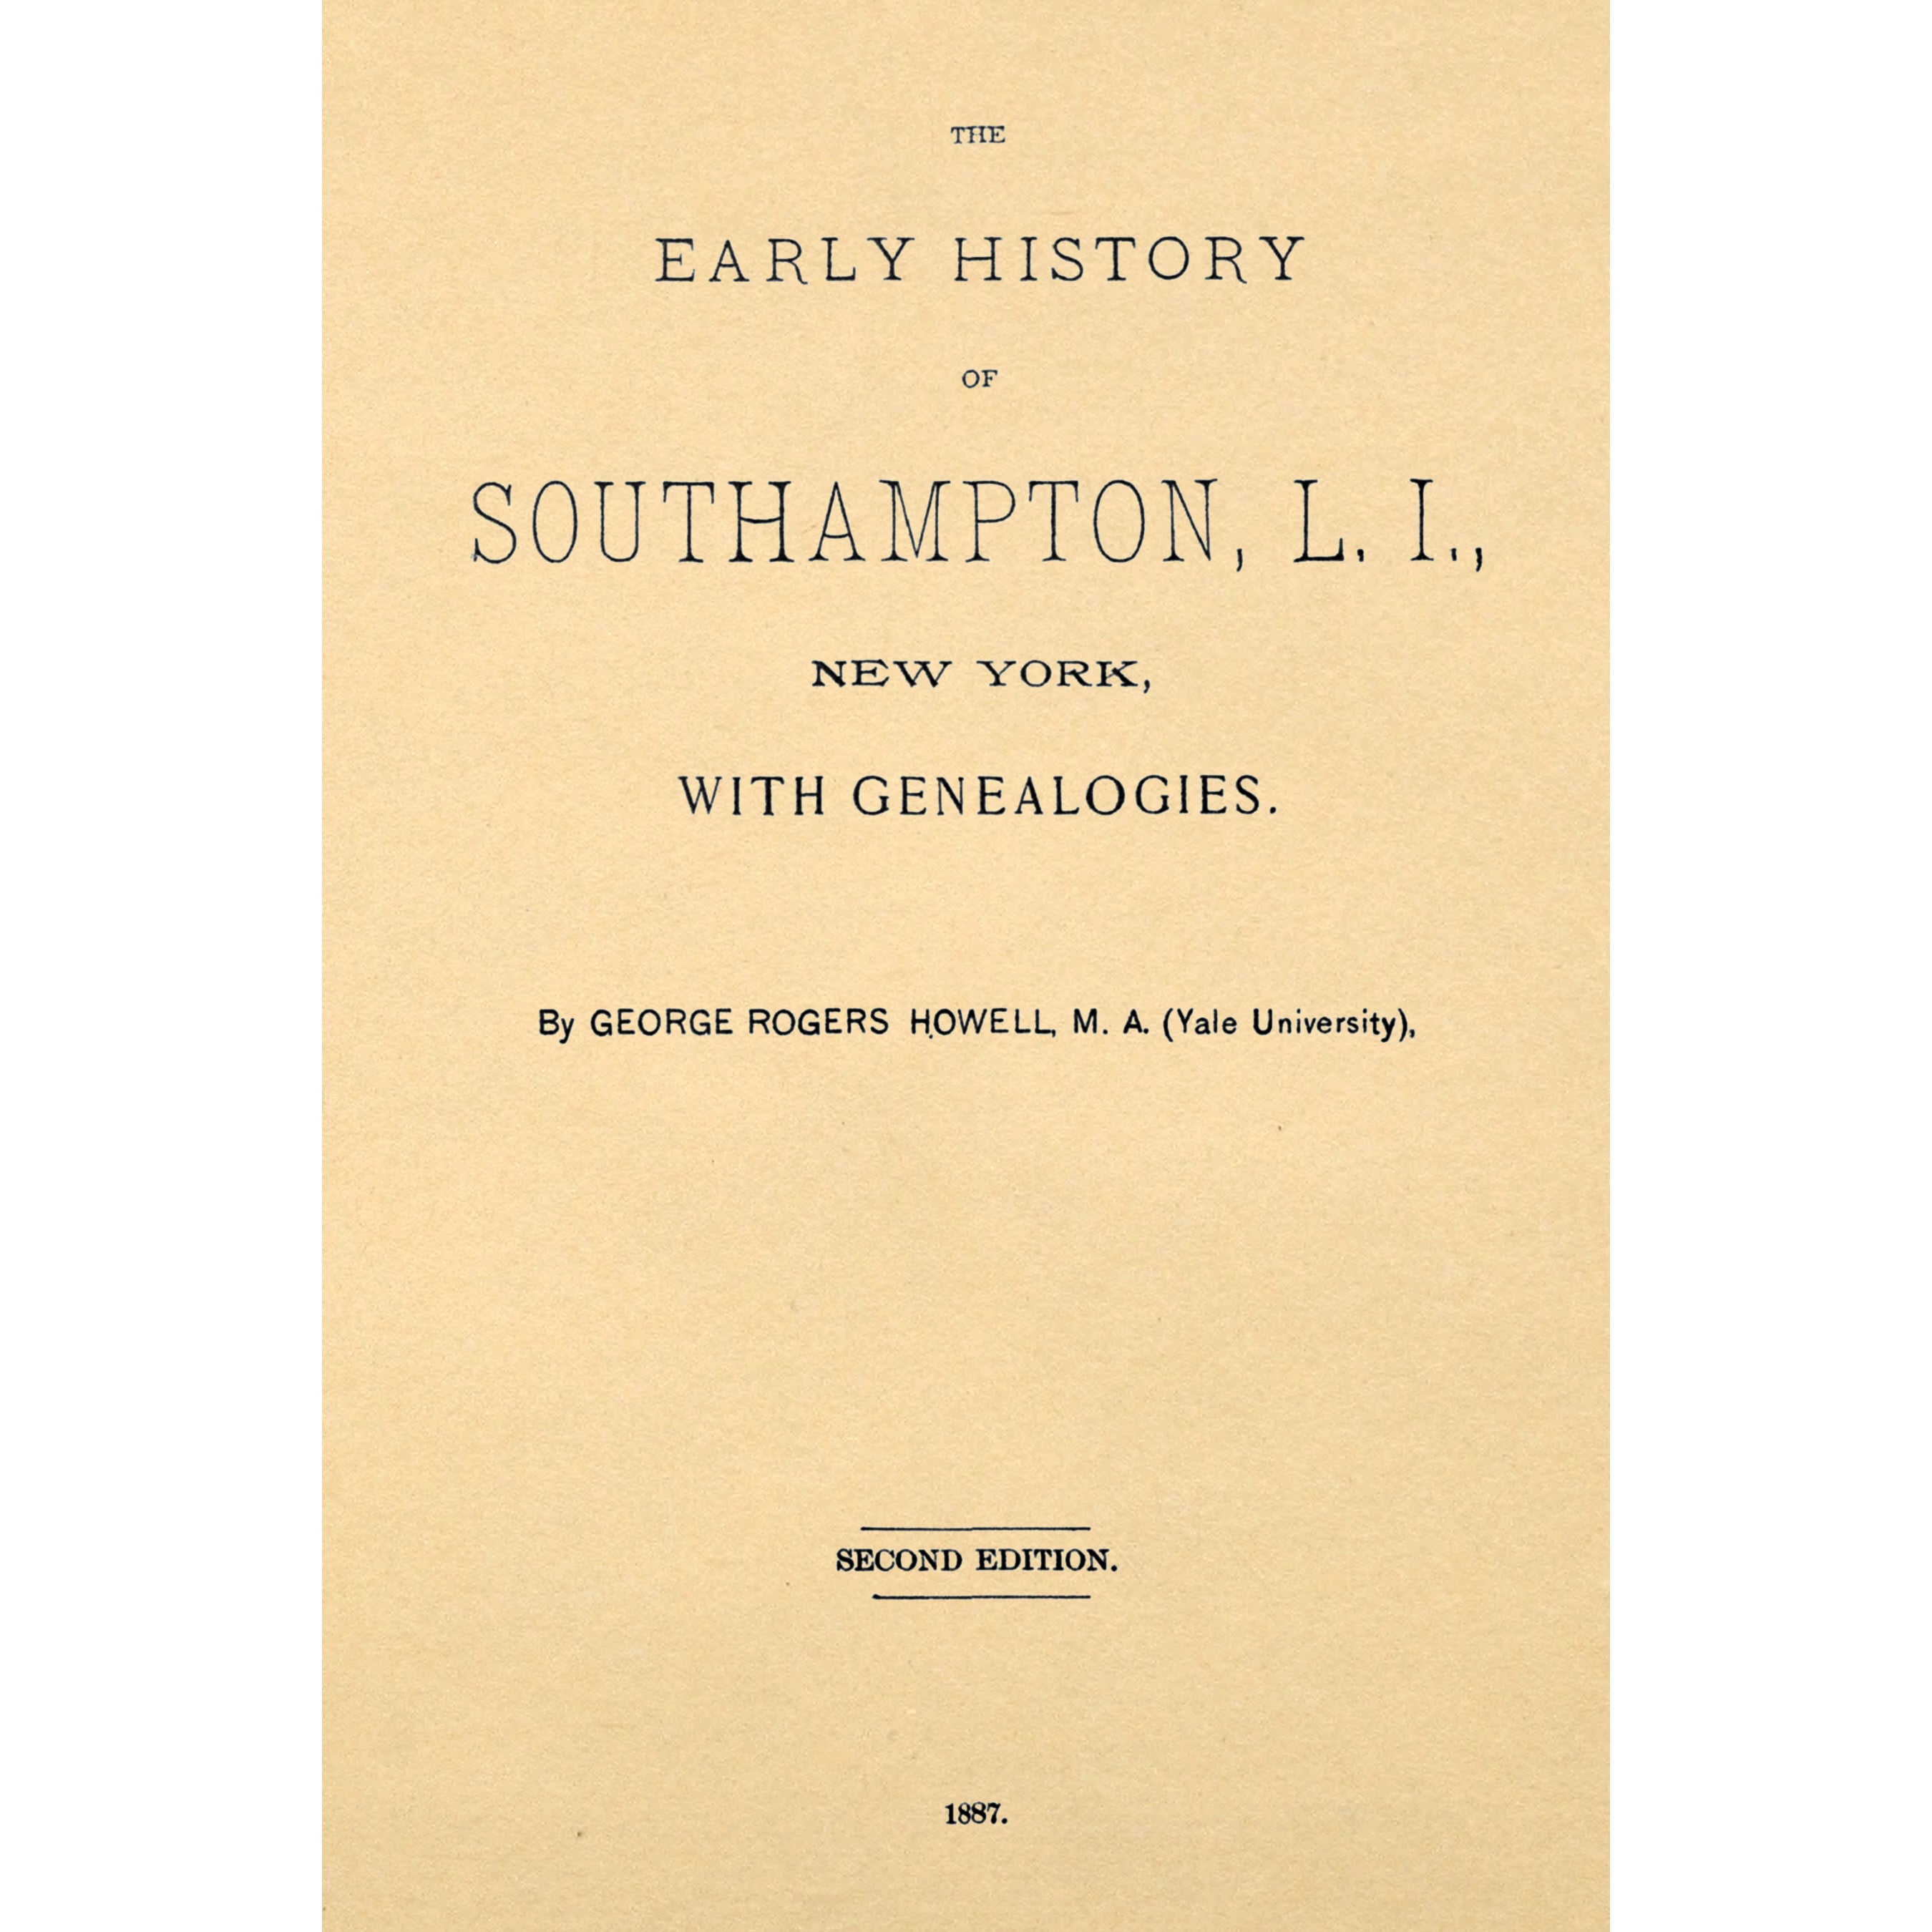 The Early History of Southampton, L. I., New York, with Genealogies.